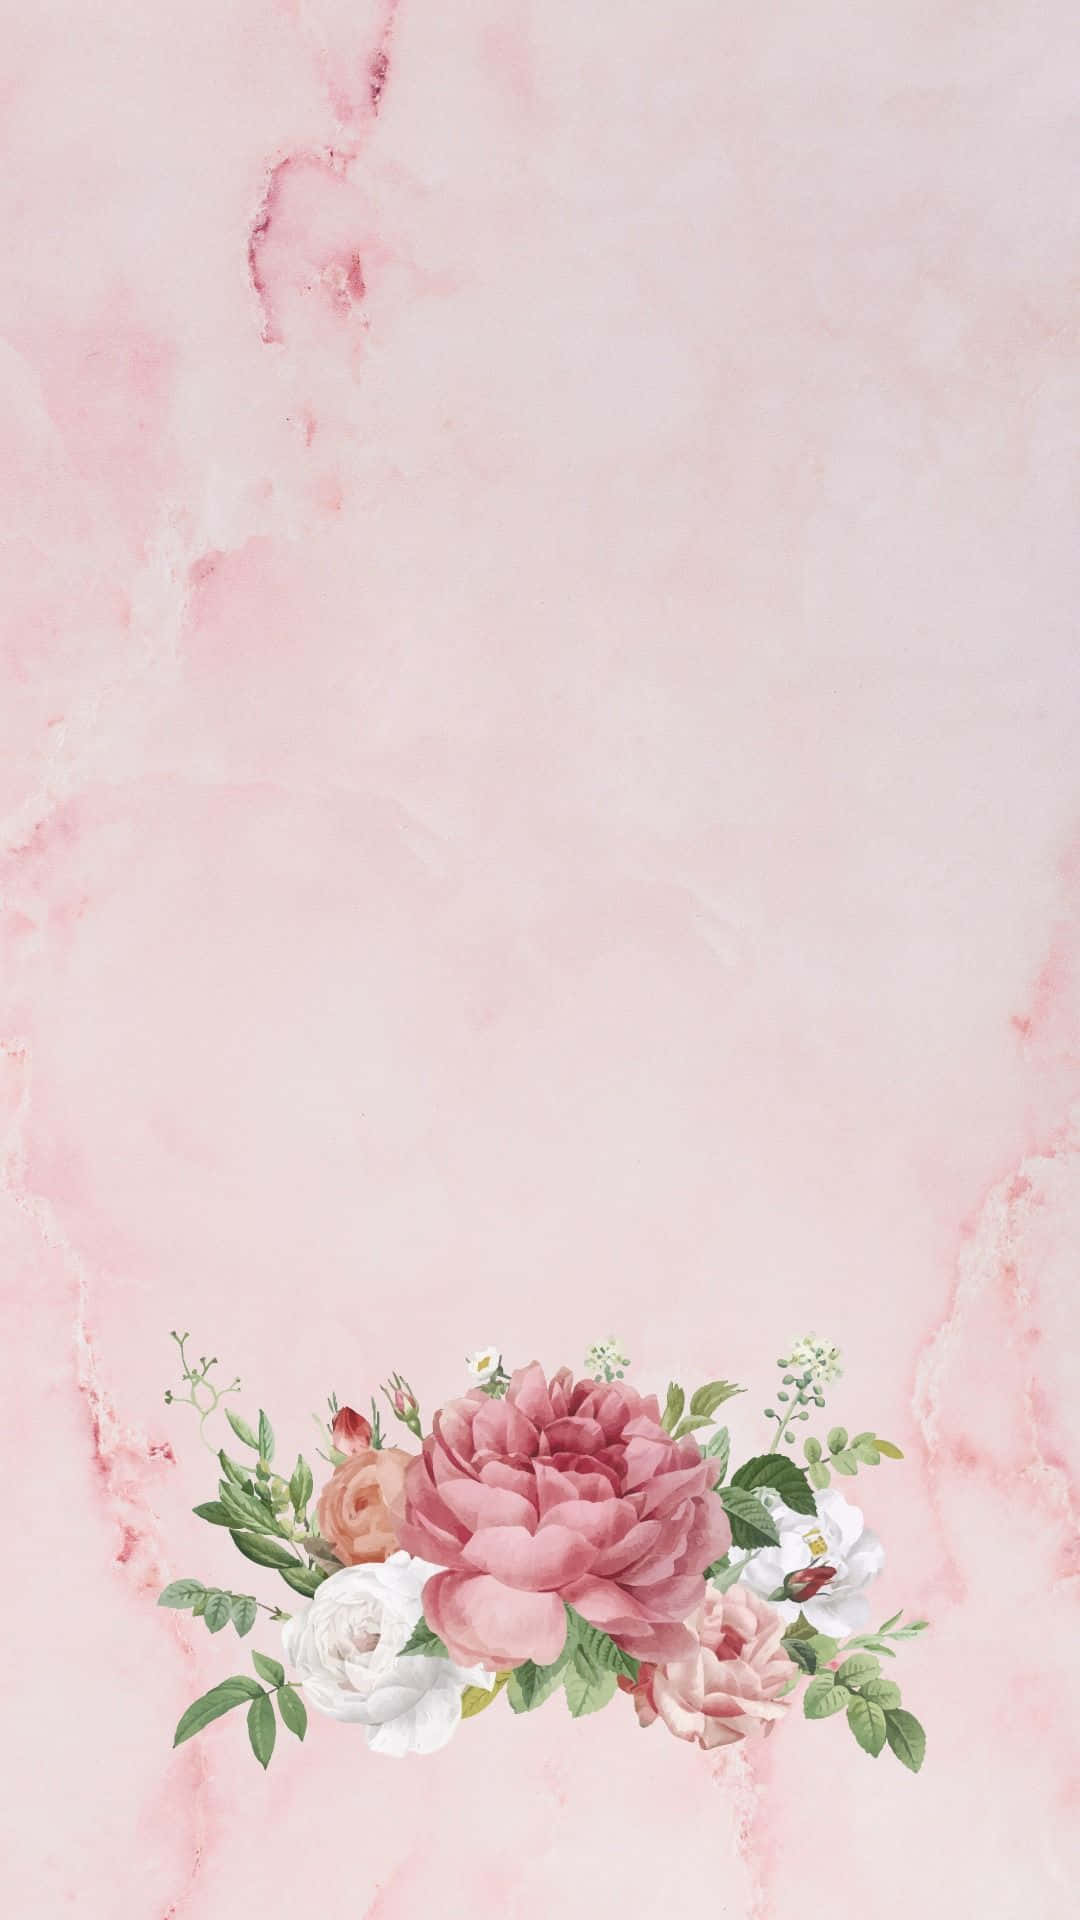 Download Enjoy the Blissful Balance of Pink and White Aesthetic Wallpaper